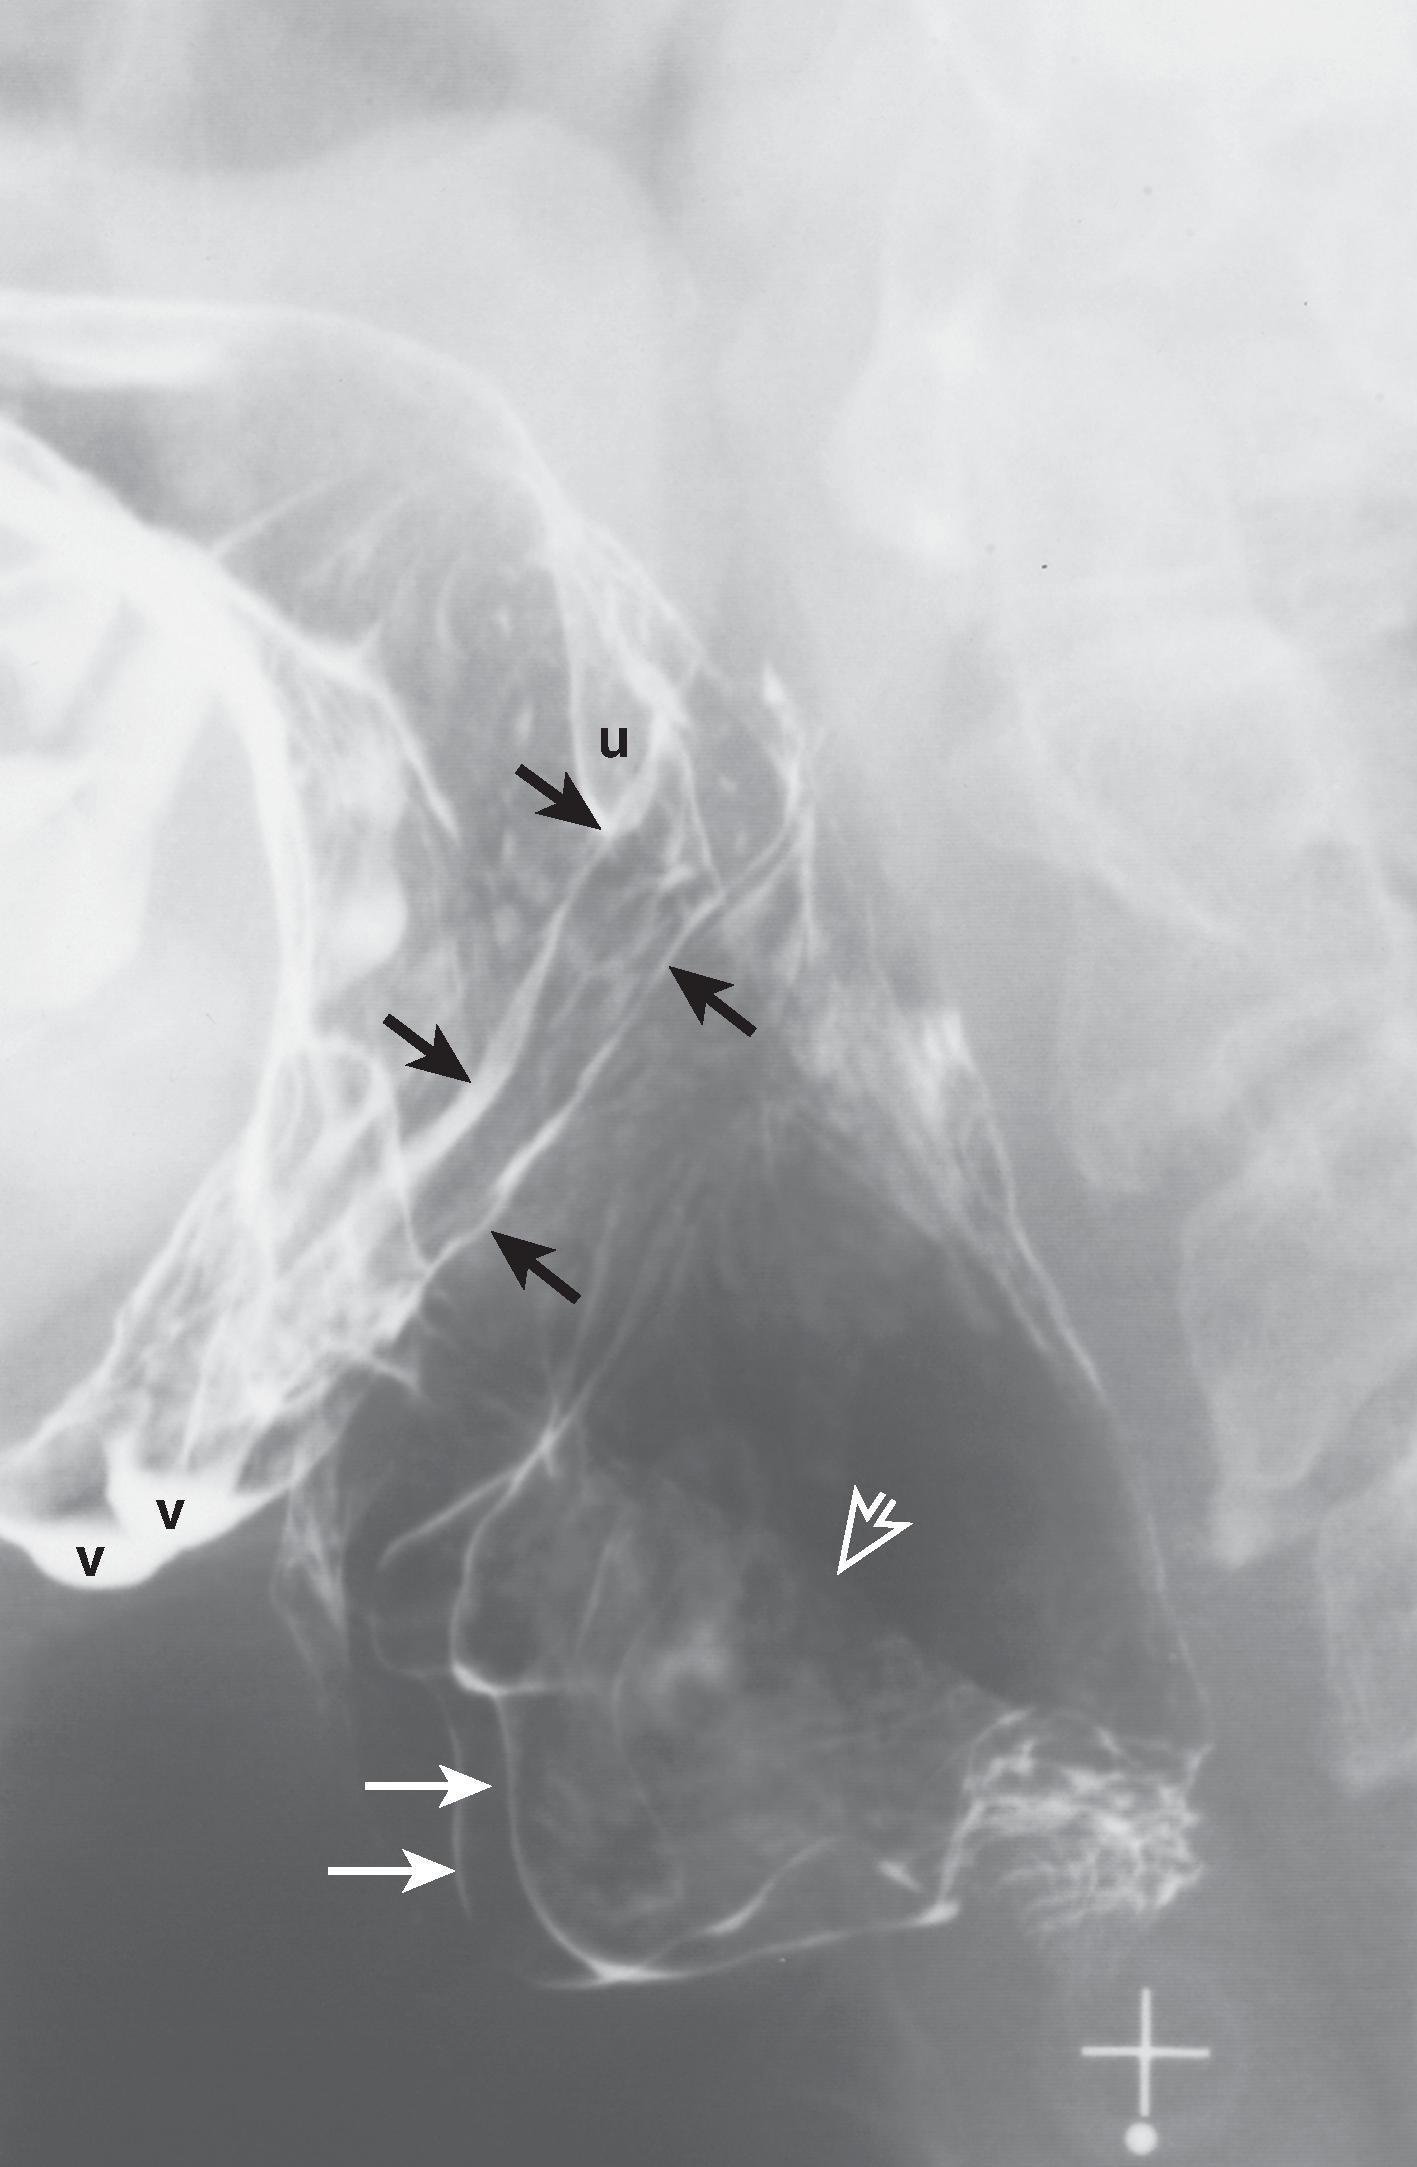 Fig. 4.4, Pharyngoepiglottic folds. Lateral spot view of the pharynx shows paired pharyngoepiglottic folds ( black arrows ) coursing obliquely across the lateral wall of the pharynx. The pharyngoepiglottic fold overlies the stylopharyngeal muscle, which extends from the styloid process to the posterior wall of the valleculae ( v ). The uvular tip ( u ) is seen. The anterior walls of the piriform sinuses ( white arrows ) are well visualized. The mucosa overlying the muscular processes of the arytenoid cartilages ( open arrow ) is also seen.